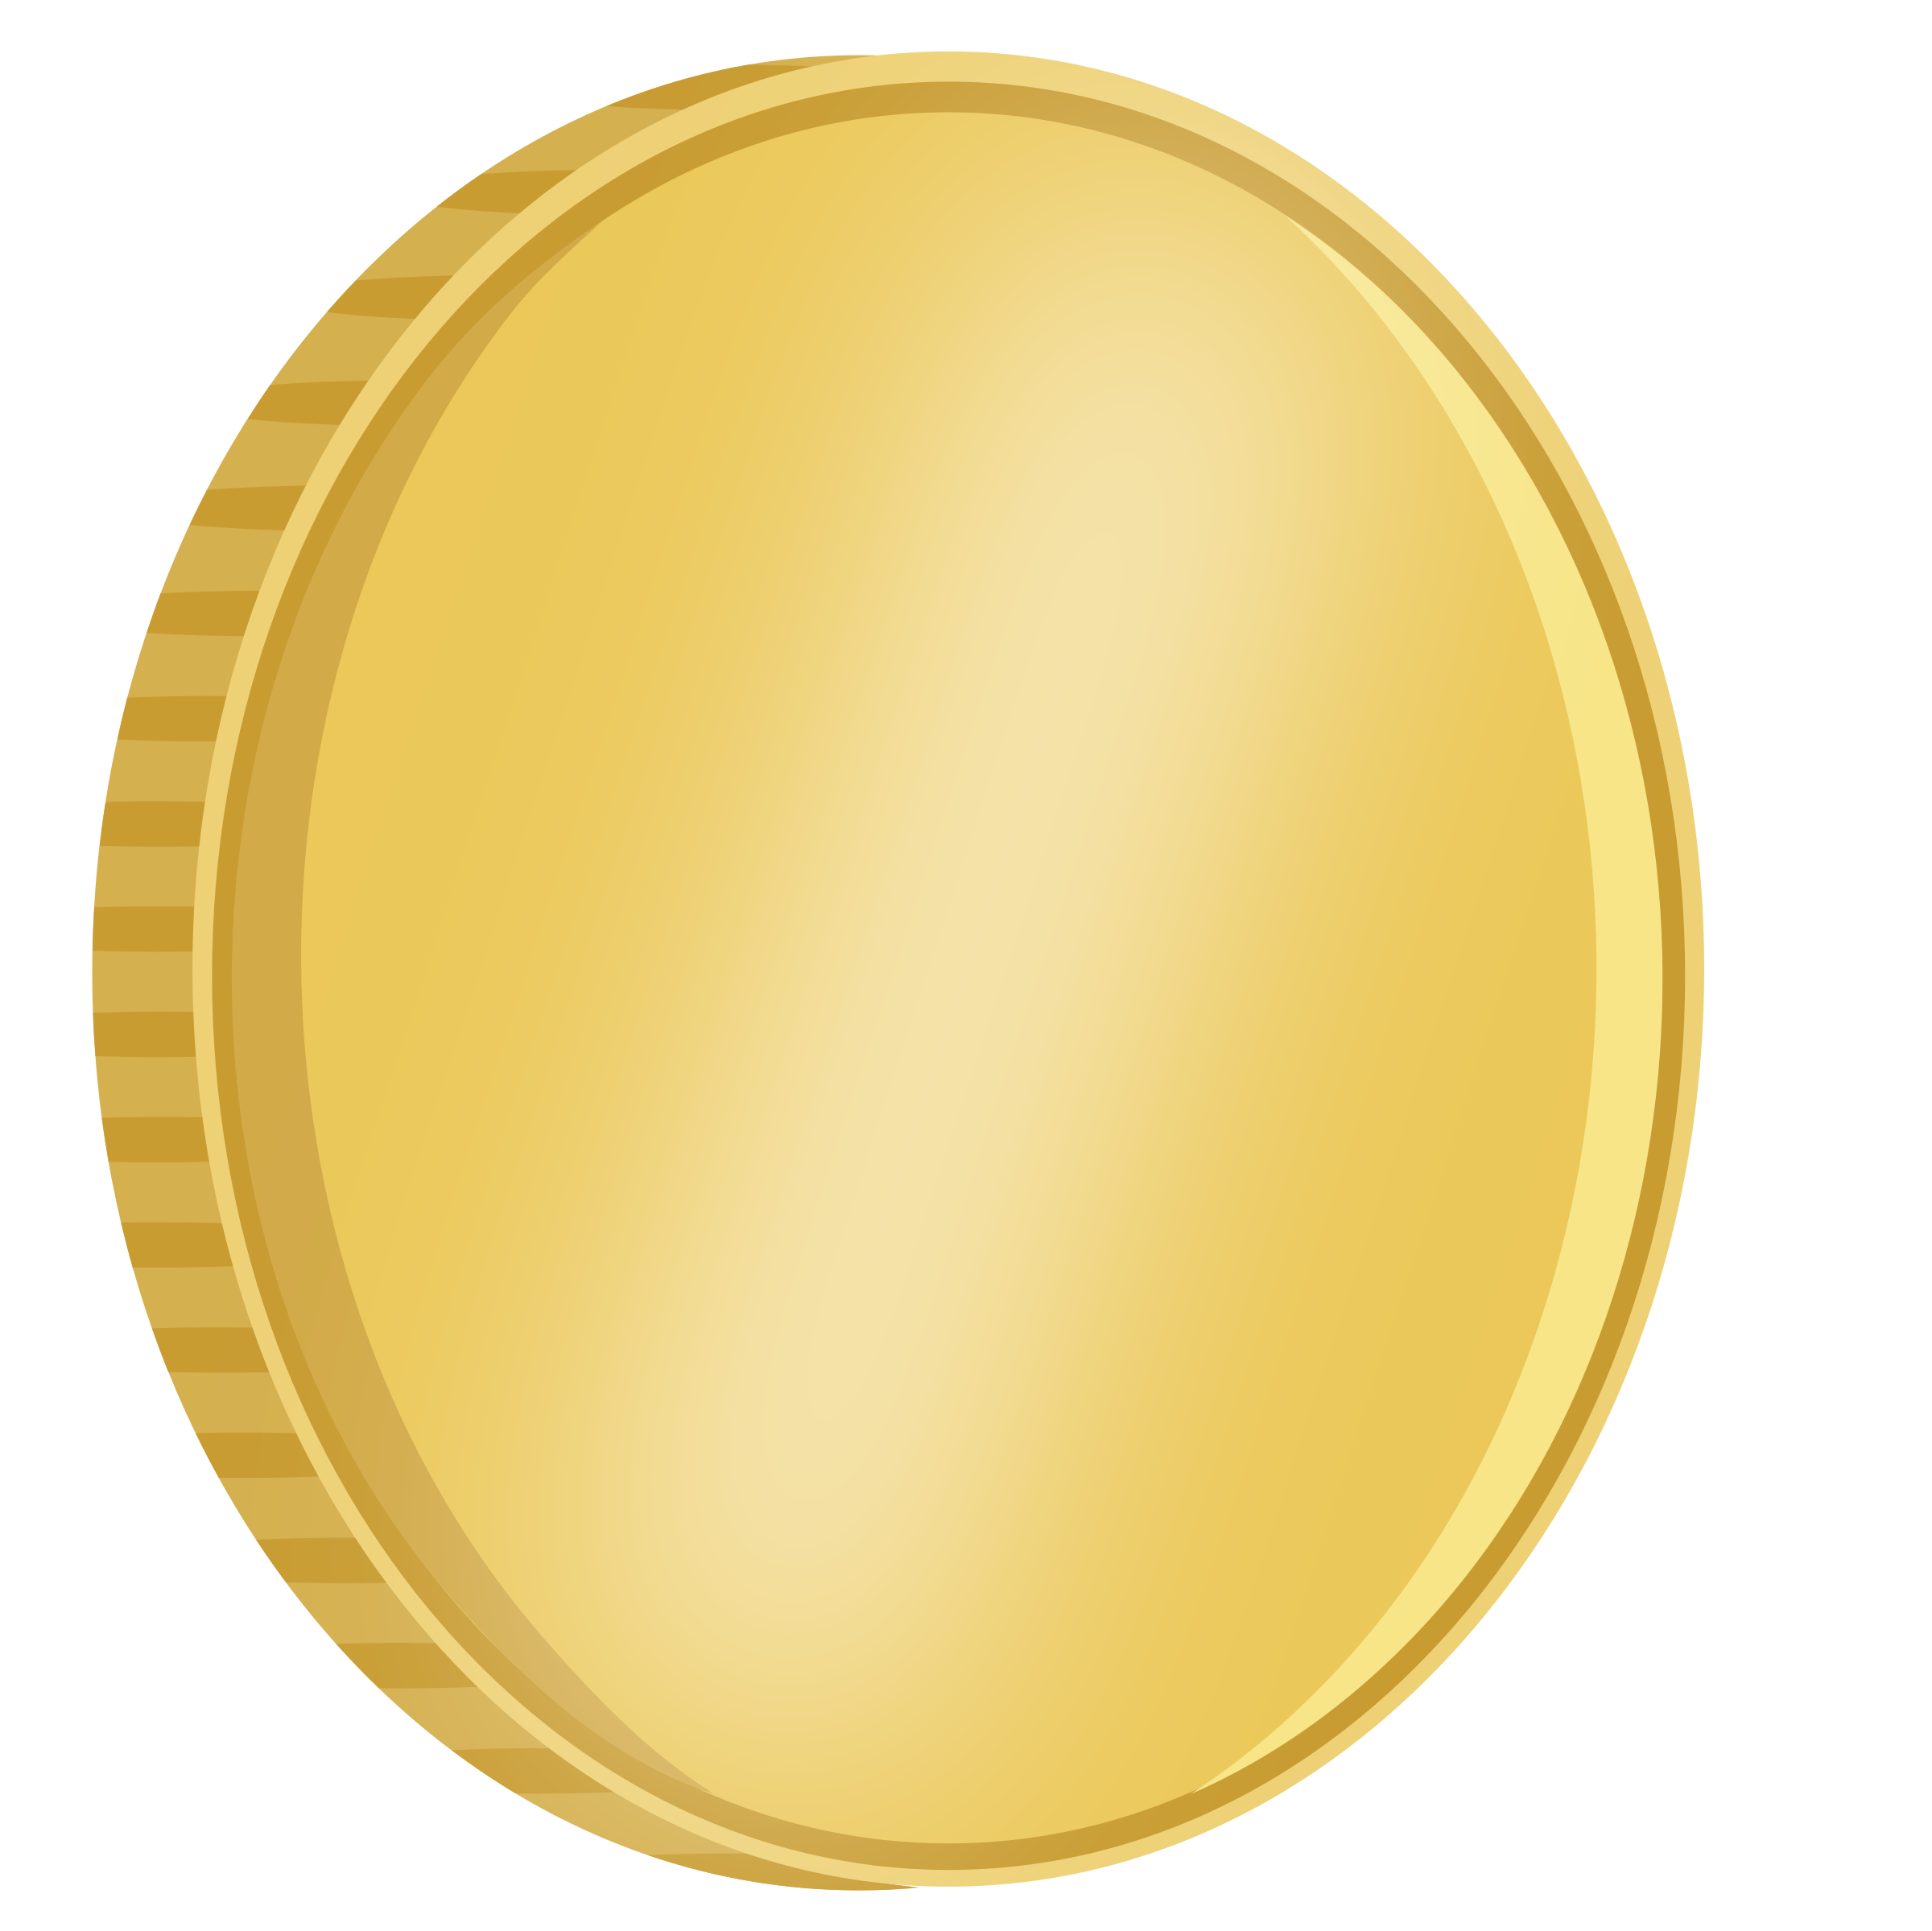 Plain Game Gold Coin PNG Pic